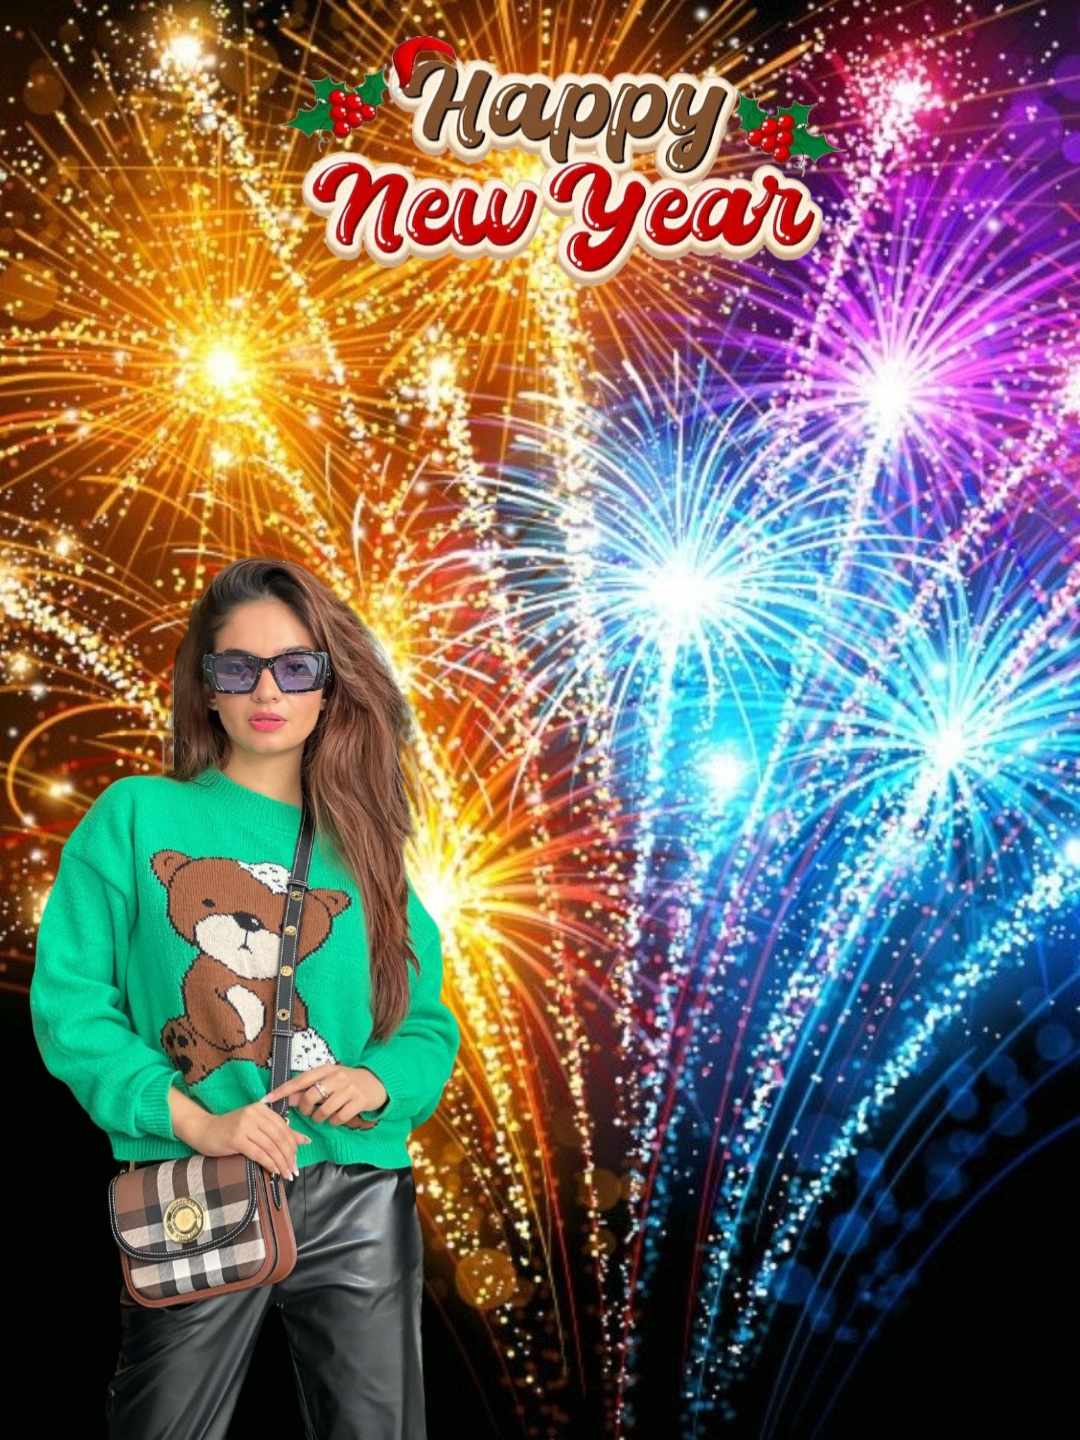 New year background girl download